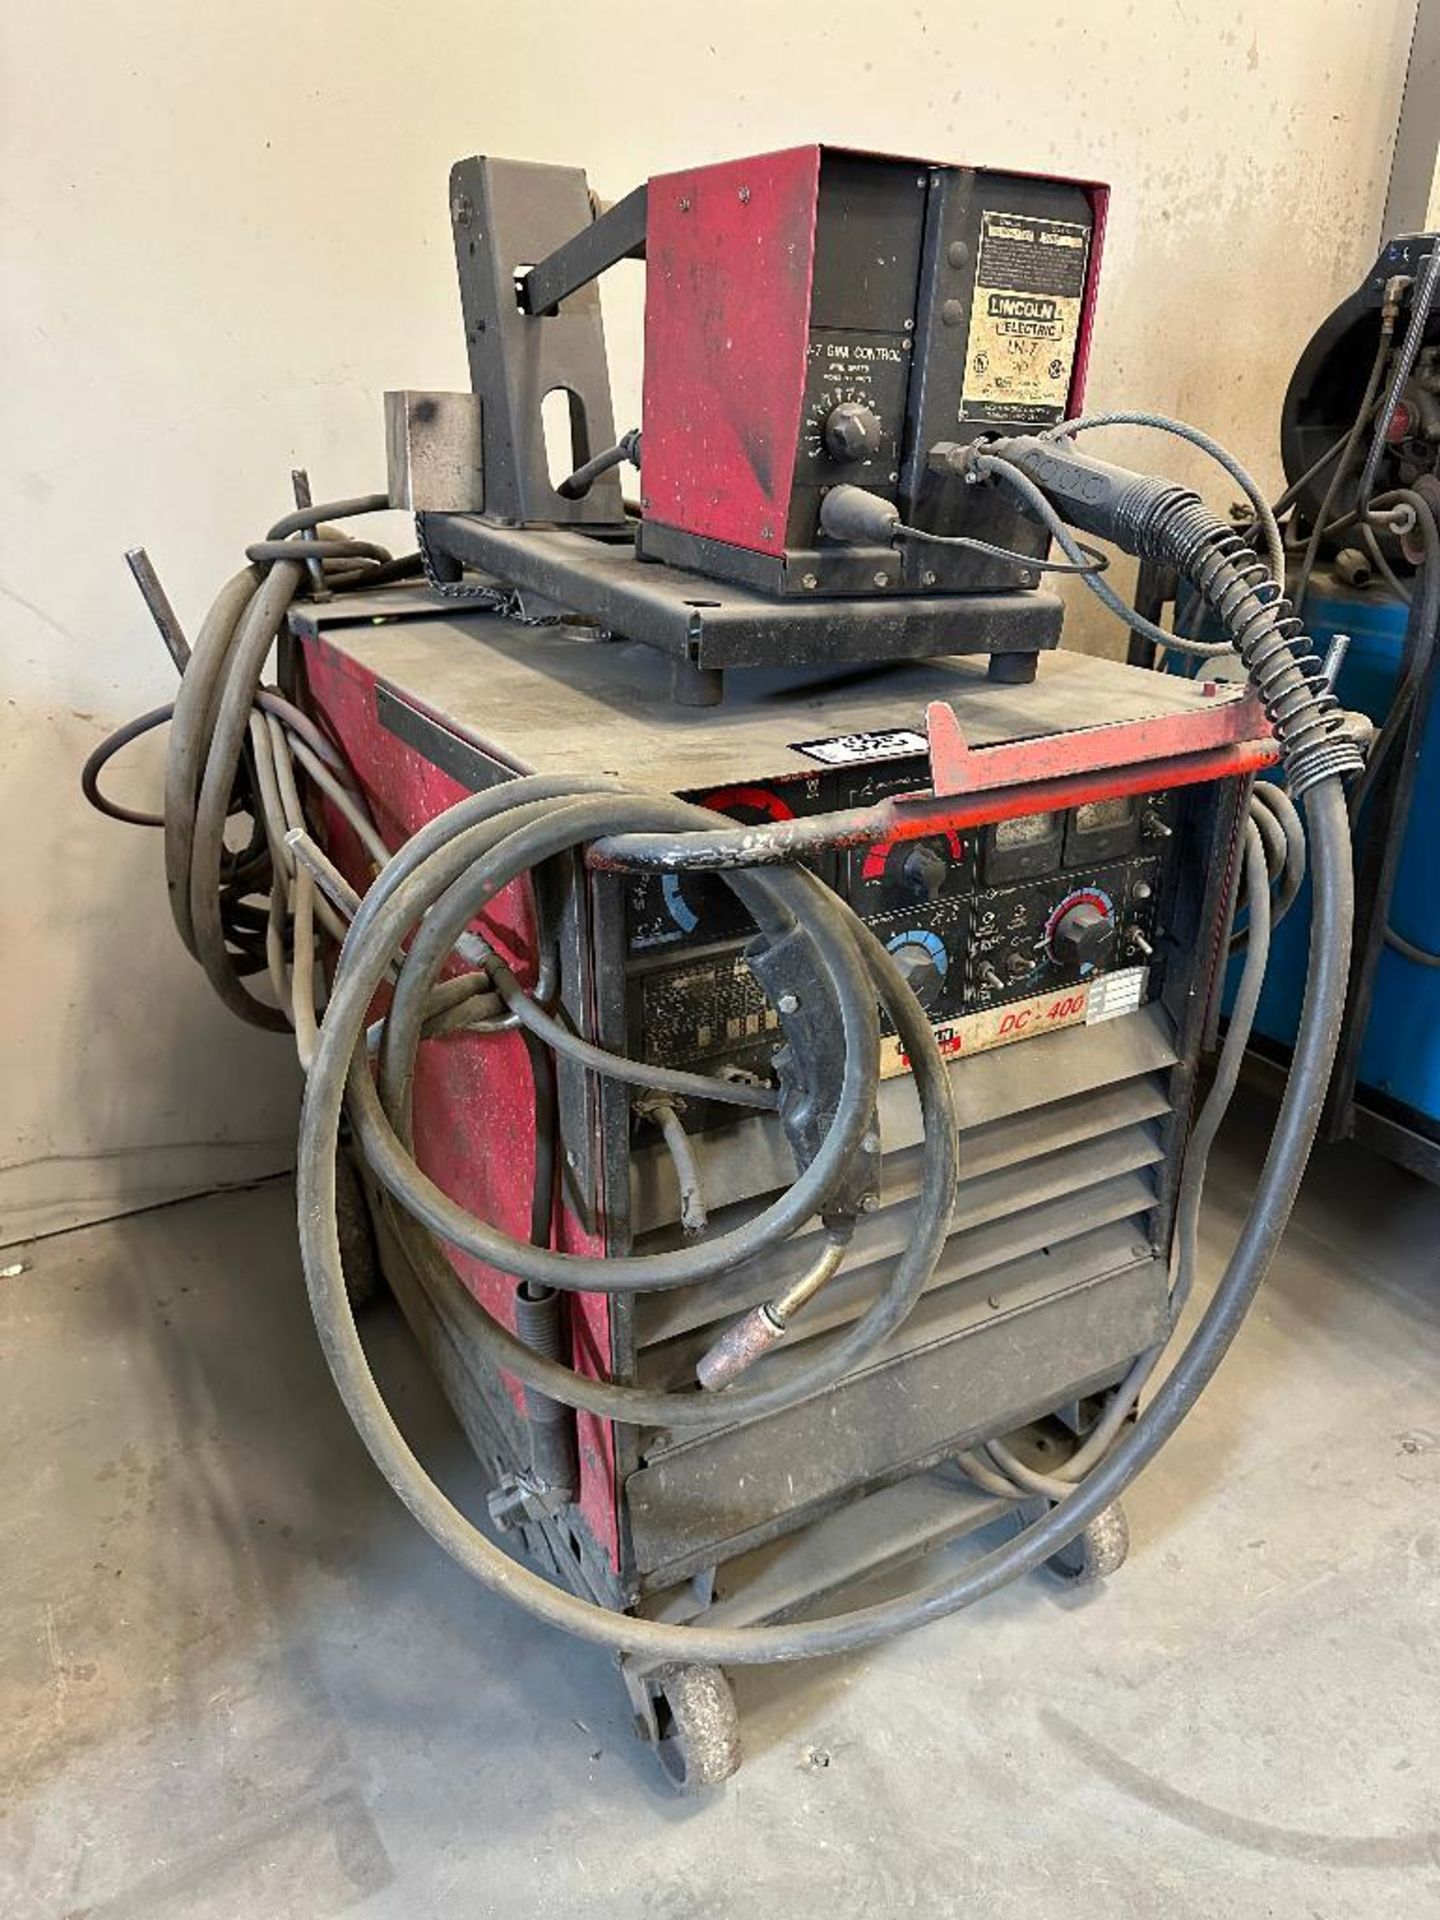 Lot of Lincoln Electric DC-400 Welder, Lincoln Electric LN-7 Wire Feeder, Bernard Gun, Cords, Cart, - Image 2 of 6